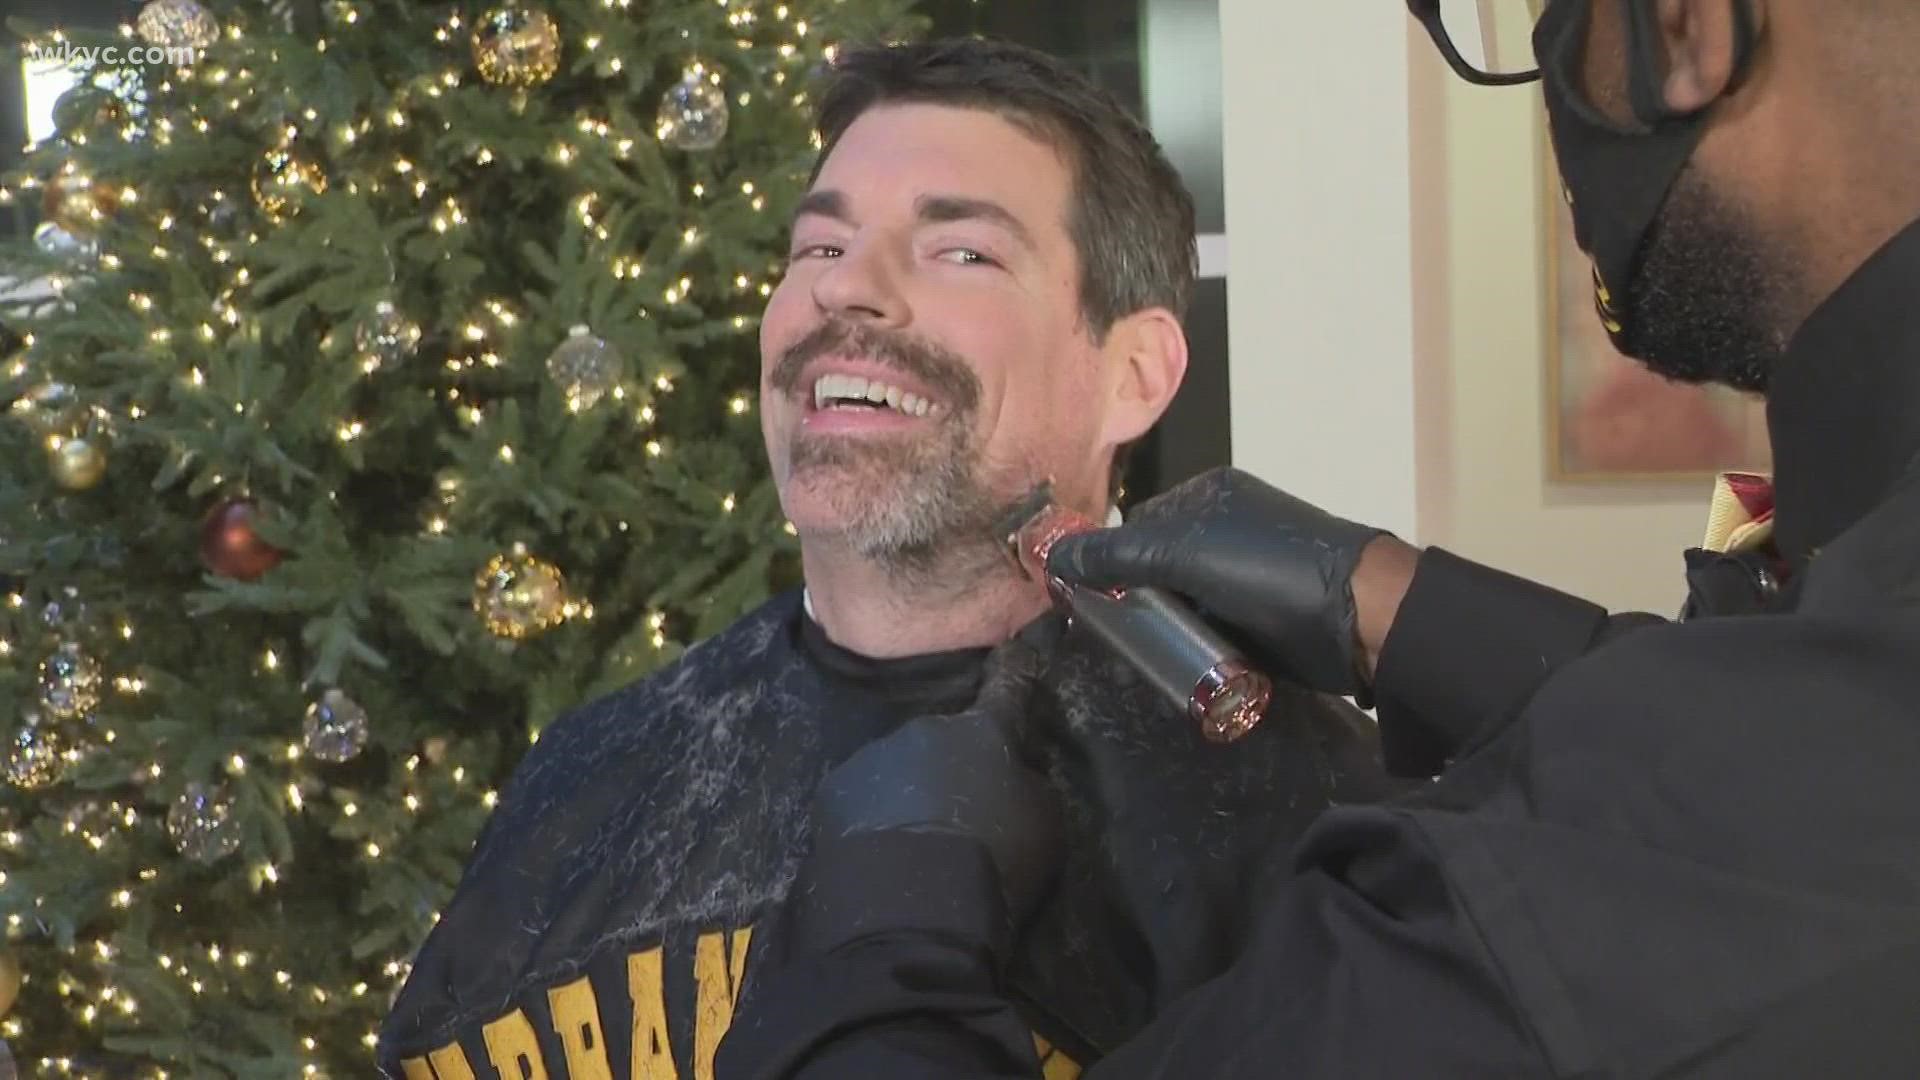 The time has come! 3News' Dave Chudowsky is shaving his beard as No-Shave November comes to an end.